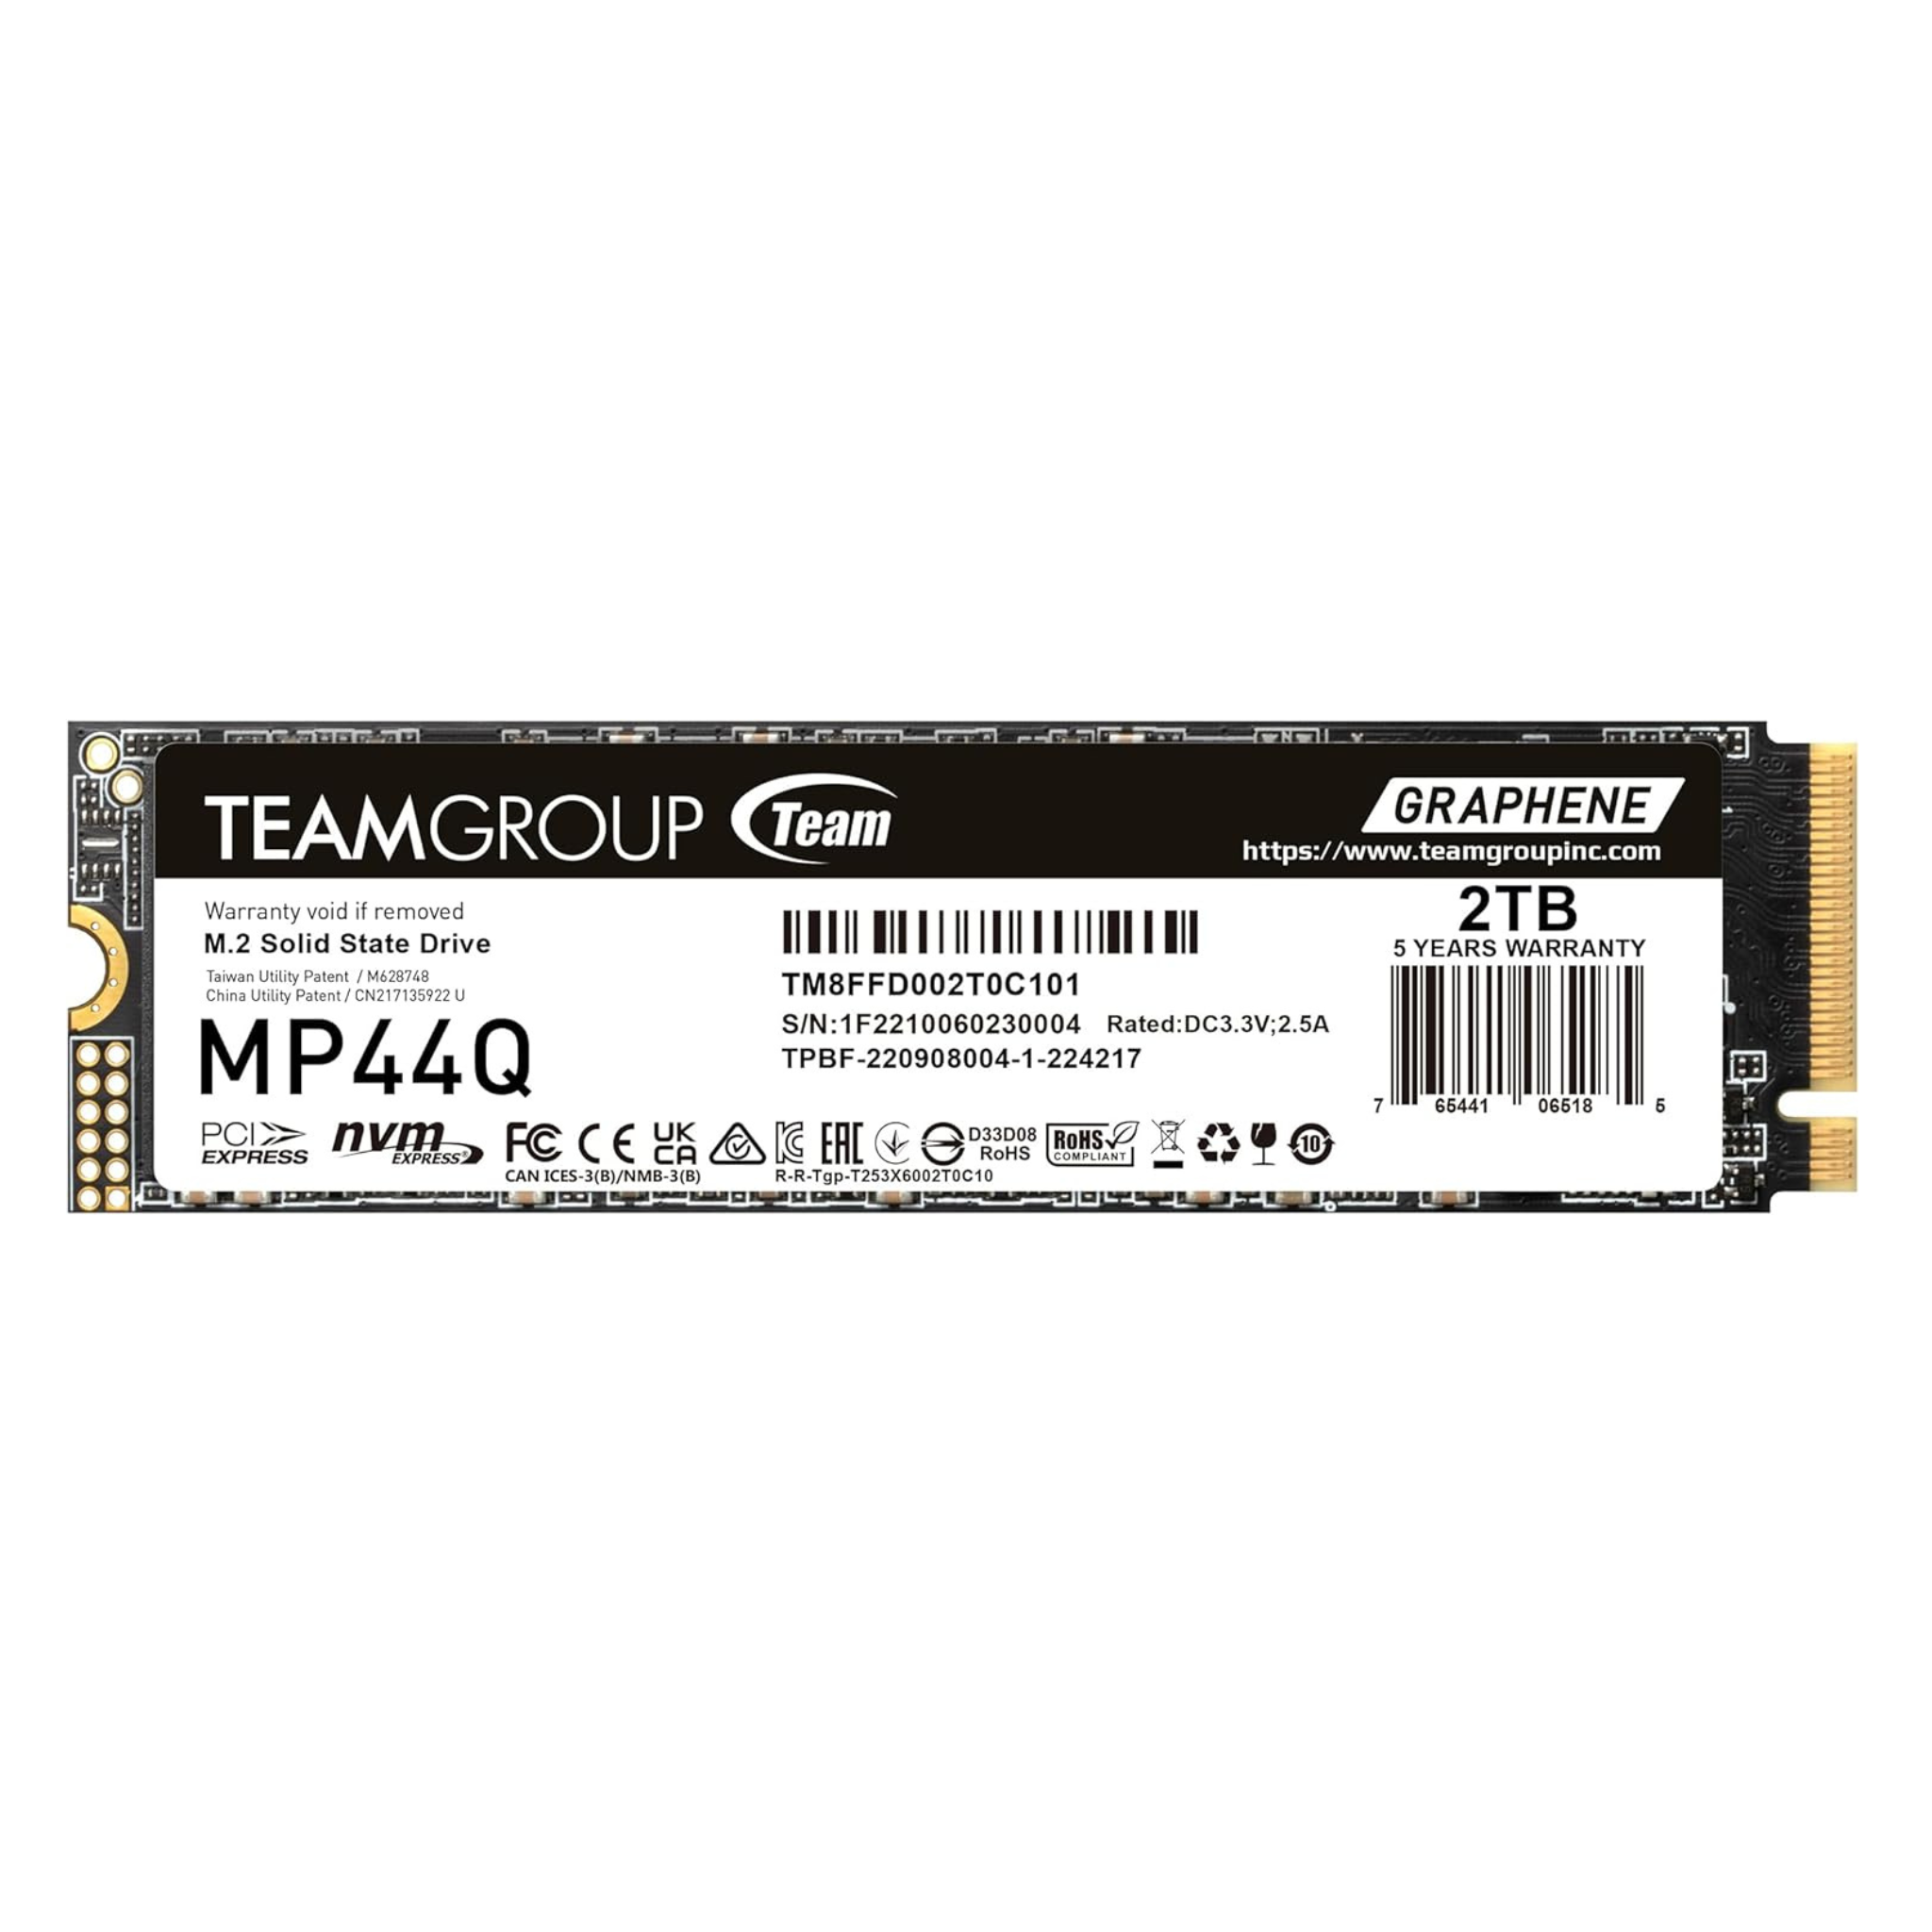 2TB TEAMGROUP MP44Q SLC Gen 4x4 M.2 2280 PCIe 4.0 NVMe Solid State Drive